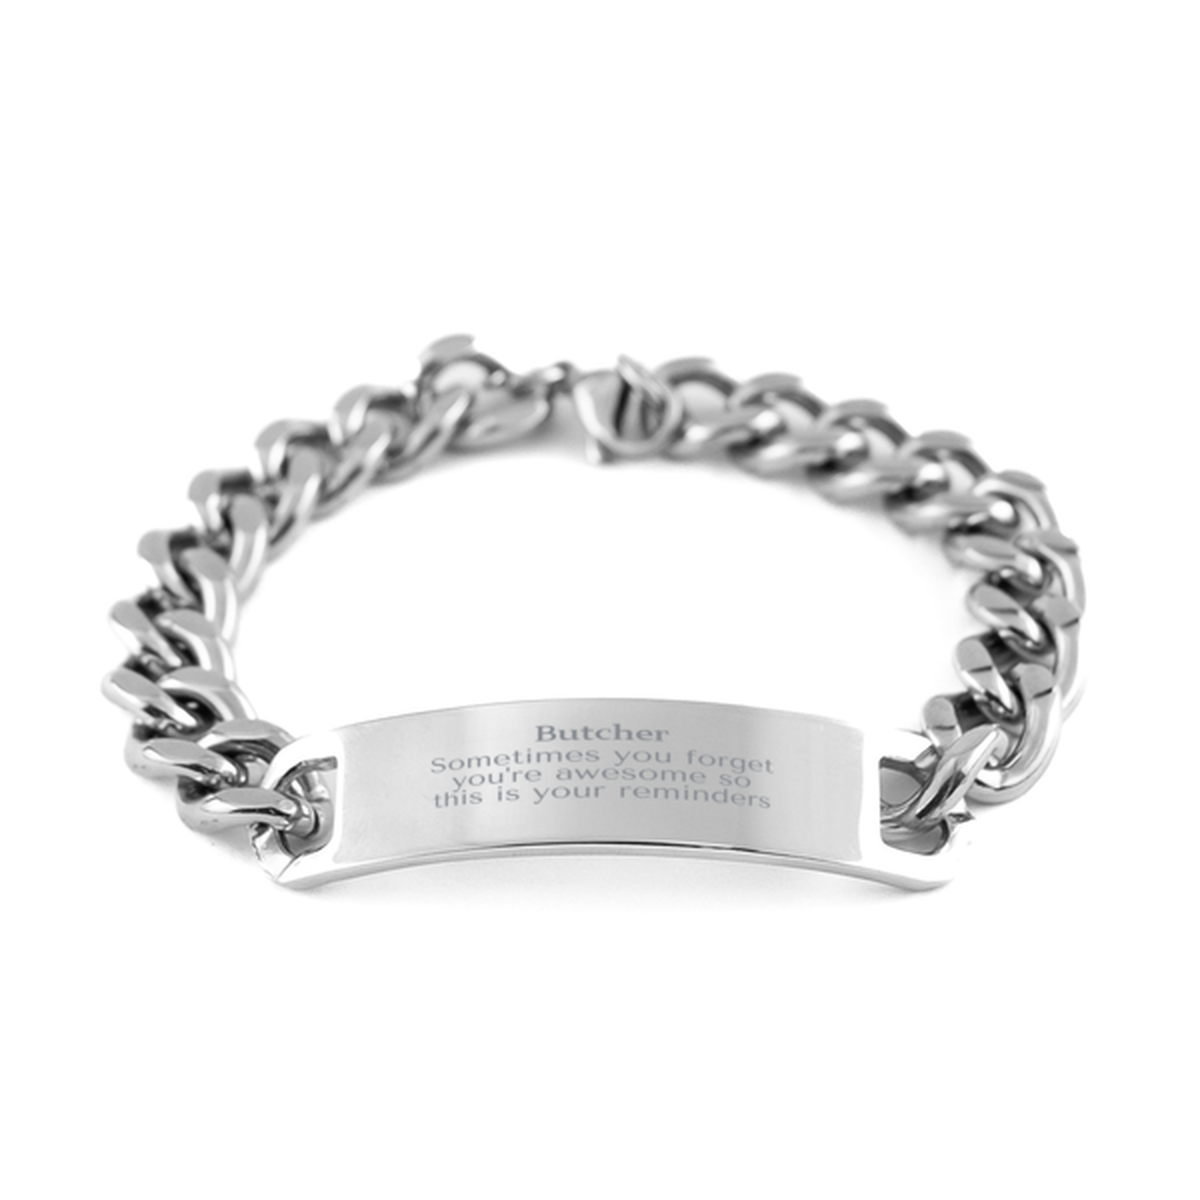 Sentimental Butcher Cuban Chain Stainless Steel Bracelet, Butcher Sometimes you forget you're awesome so this is your reminders, Graduation Christmas Birthday Gifts for Butcher, Men, Women, Coworkers